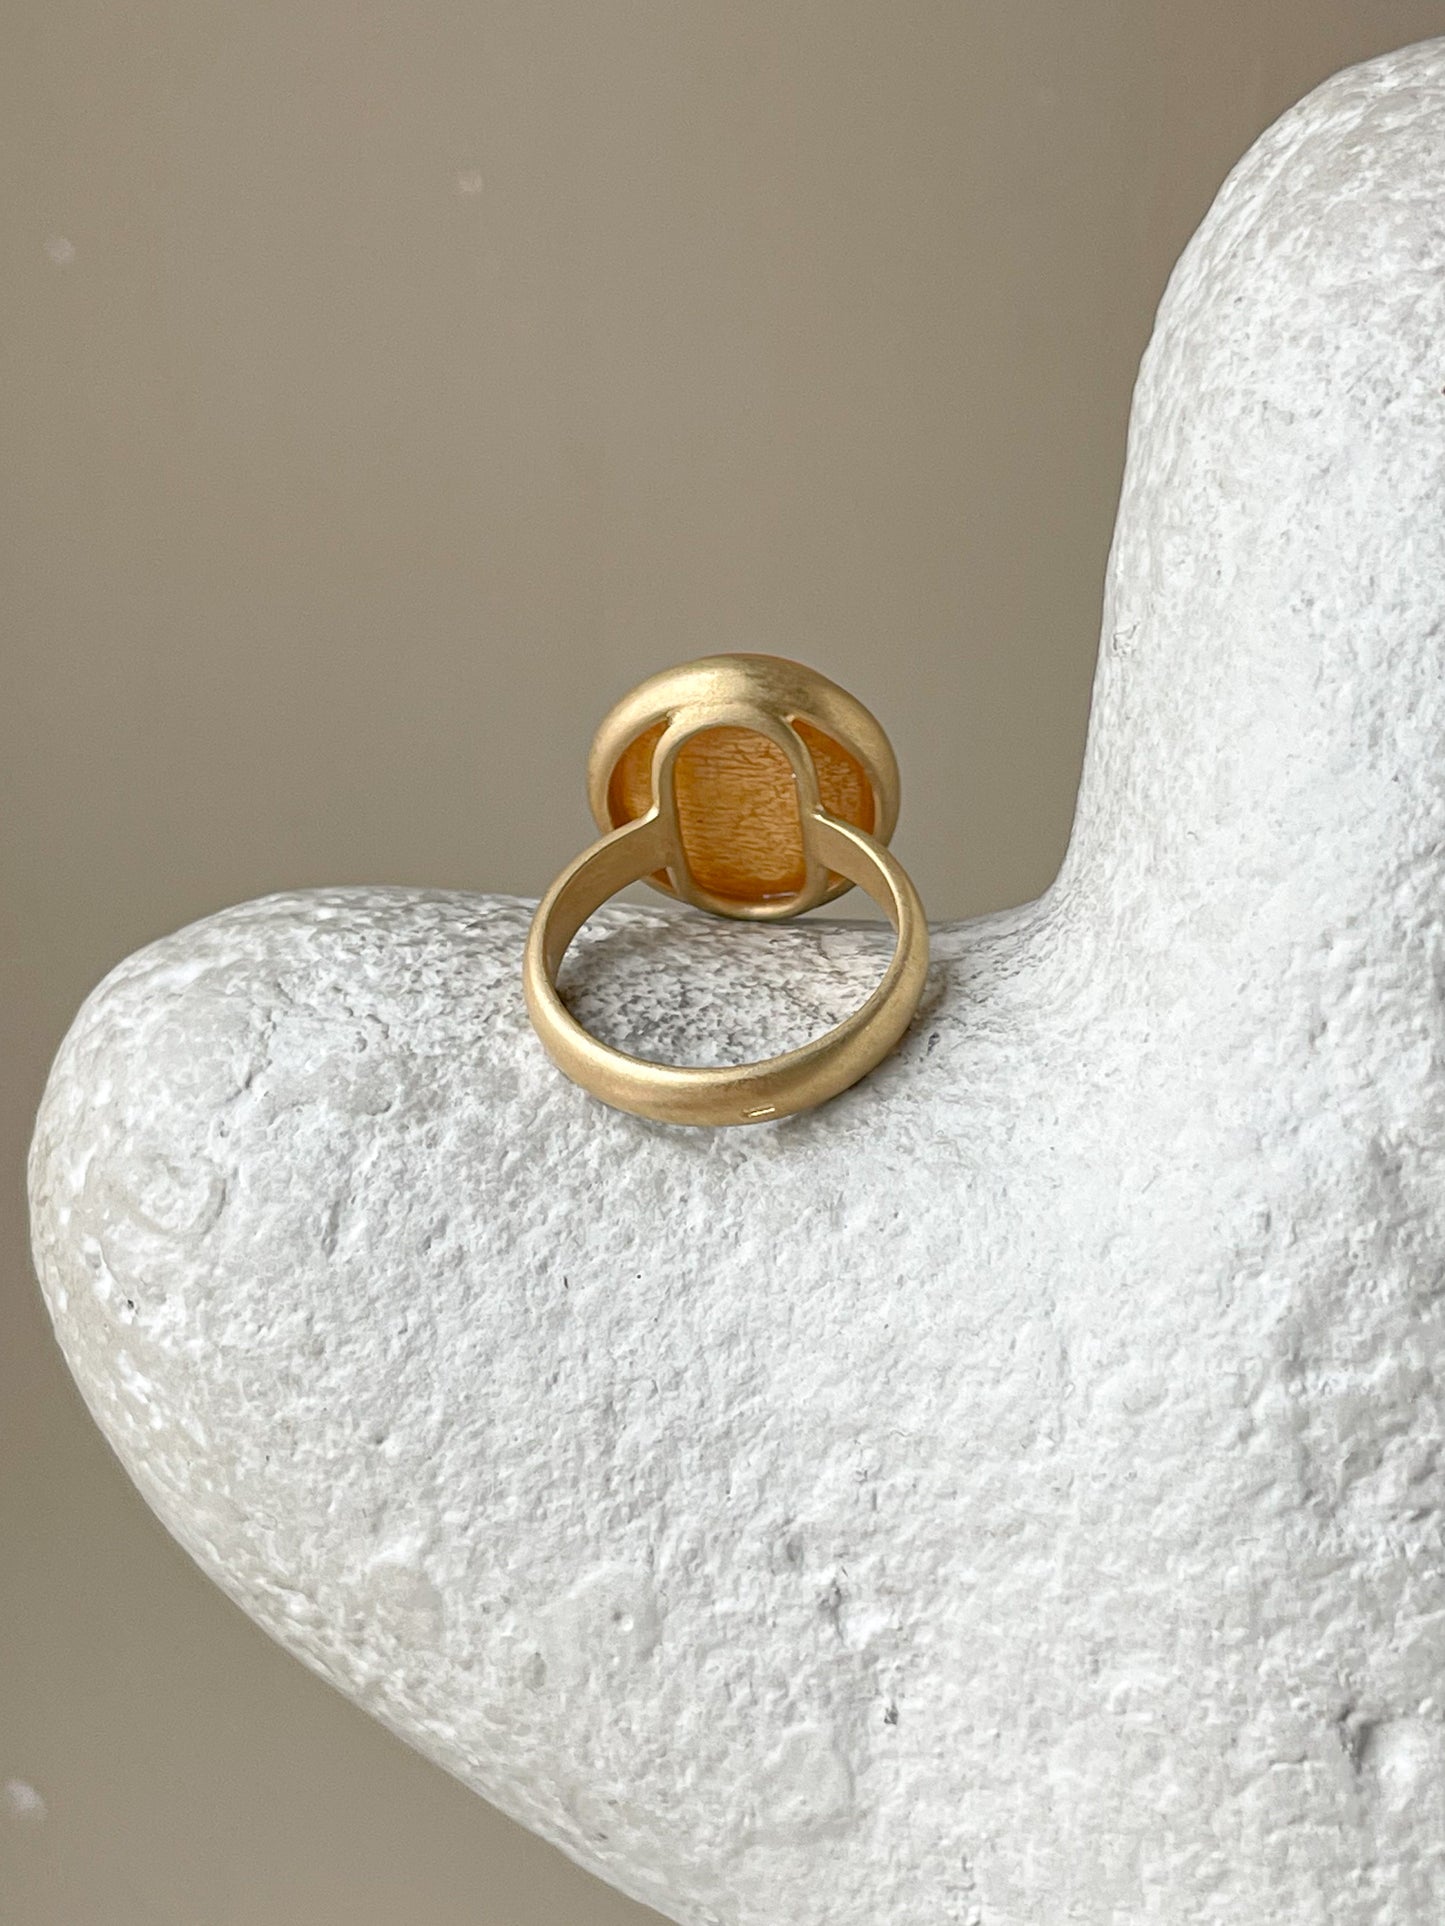 Butterscotch amber ring - Gold plated silver - Large ring collection - Size 7 1/2